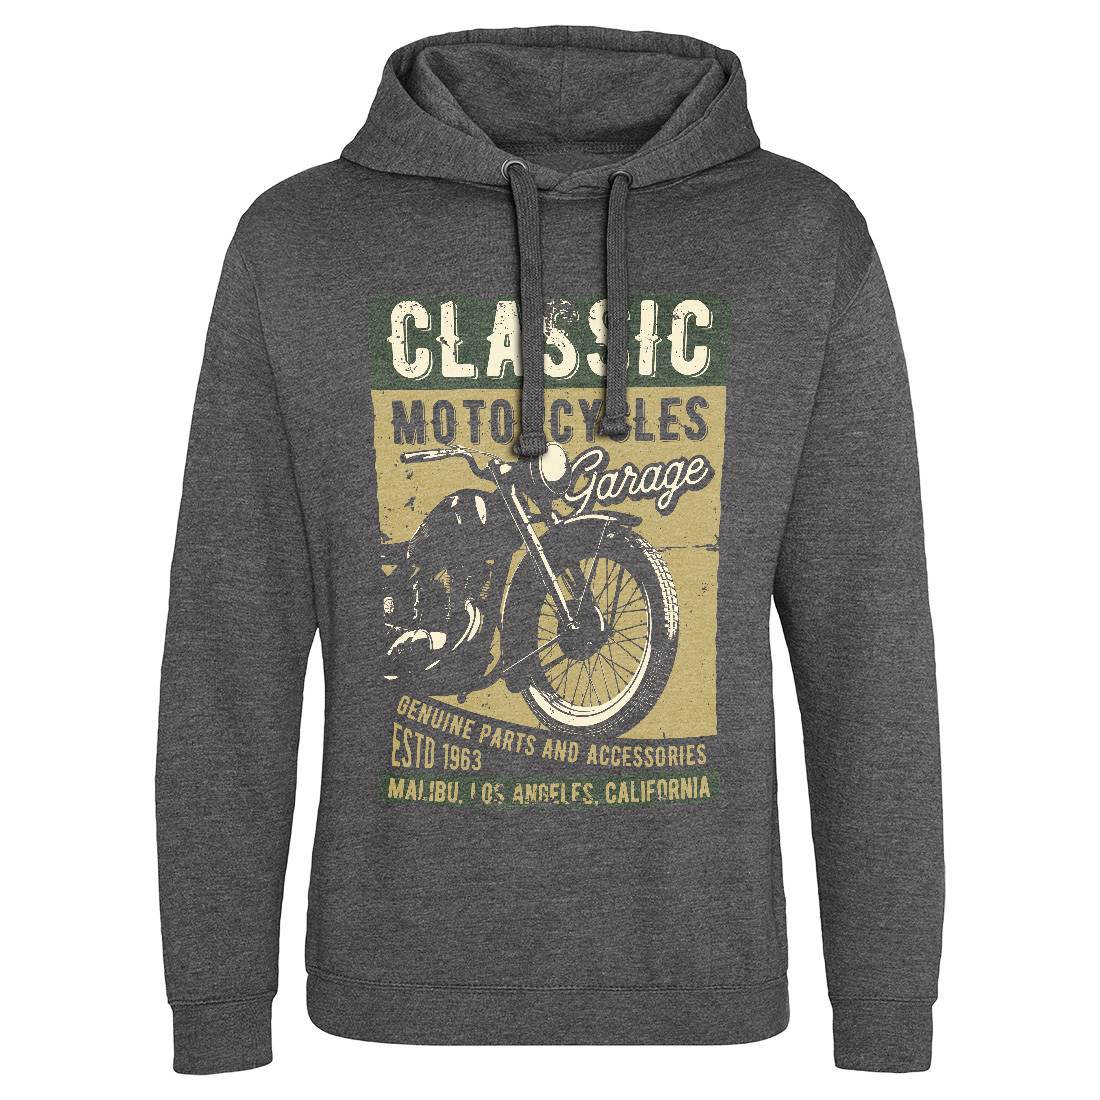 Motor Mens Hoodie Without Pocket Motorcycles B310